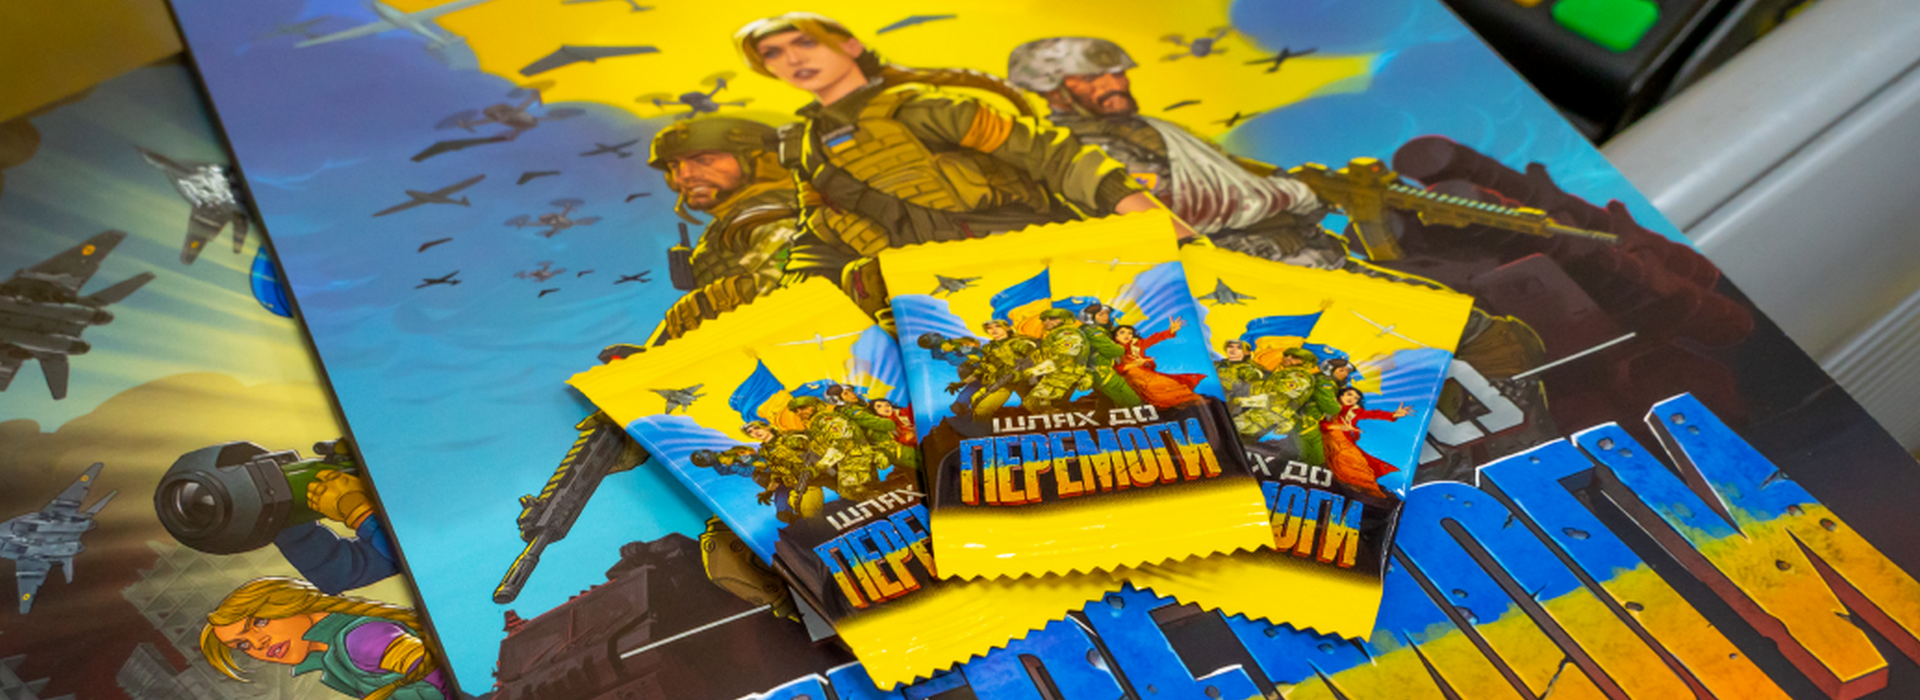 “Avrora Multimarket” Started a Charity Collection for Drones for the Armed Forces of Ukraine Through United24